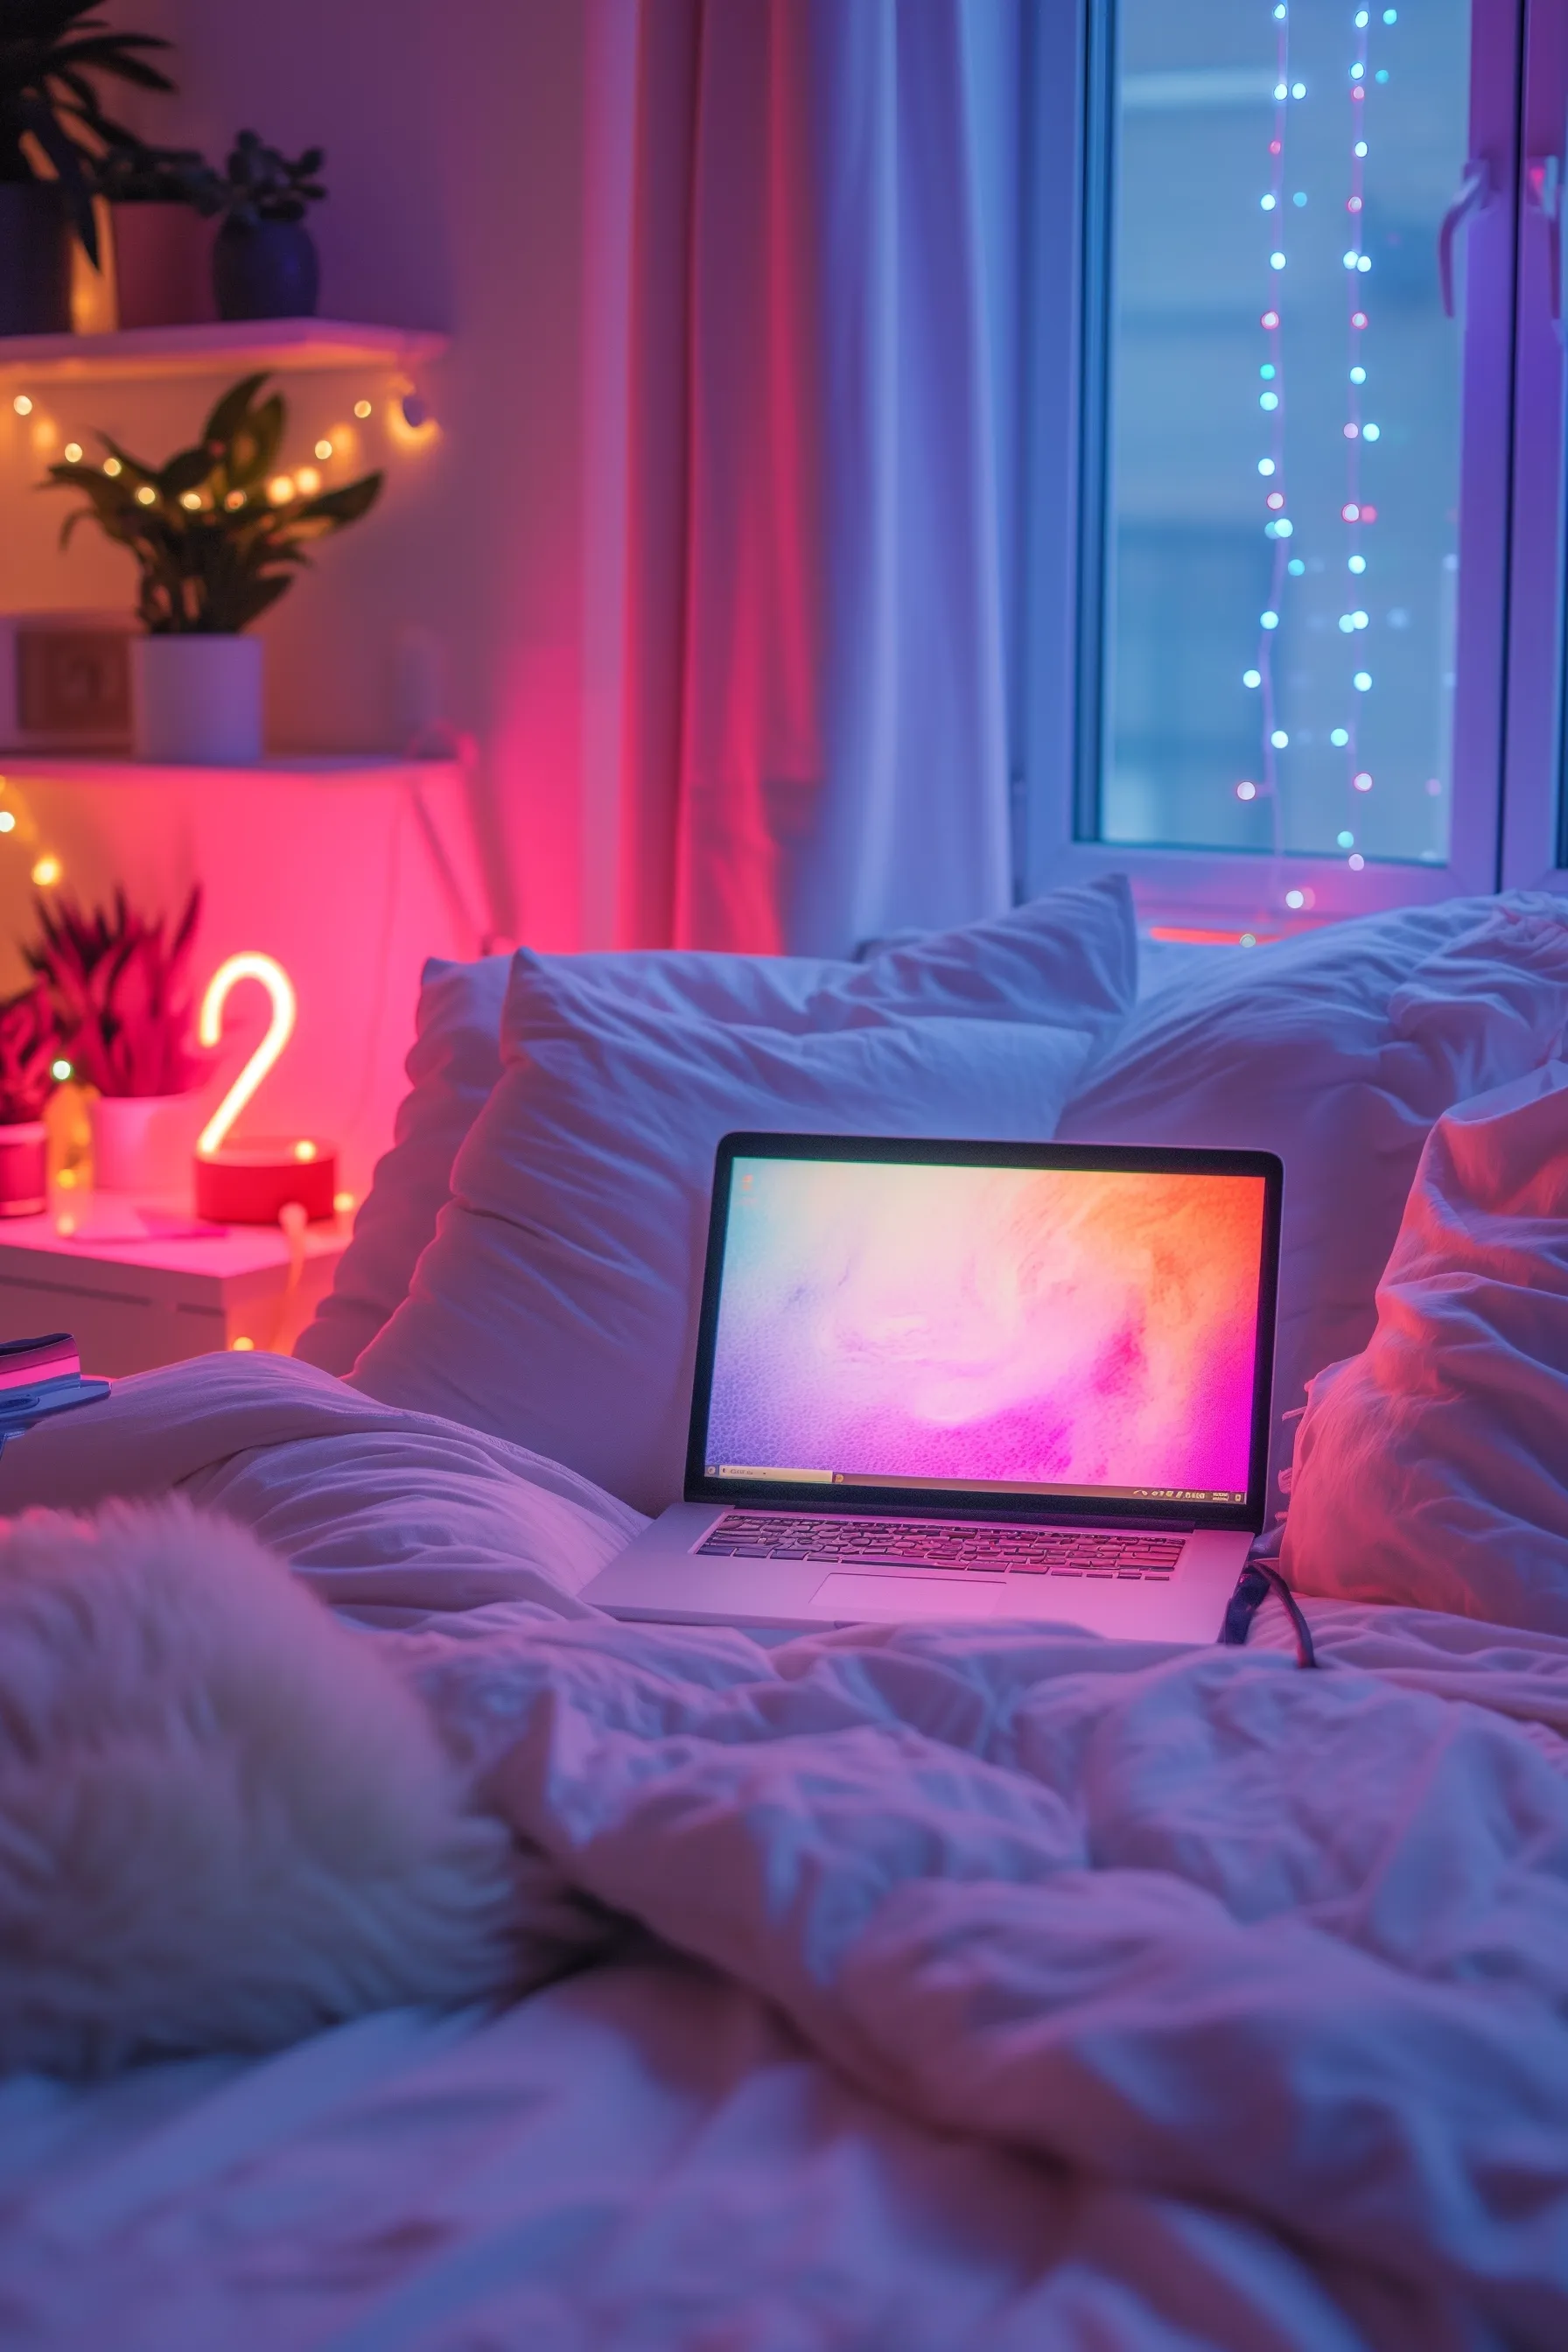 A dorm room with neon lights.